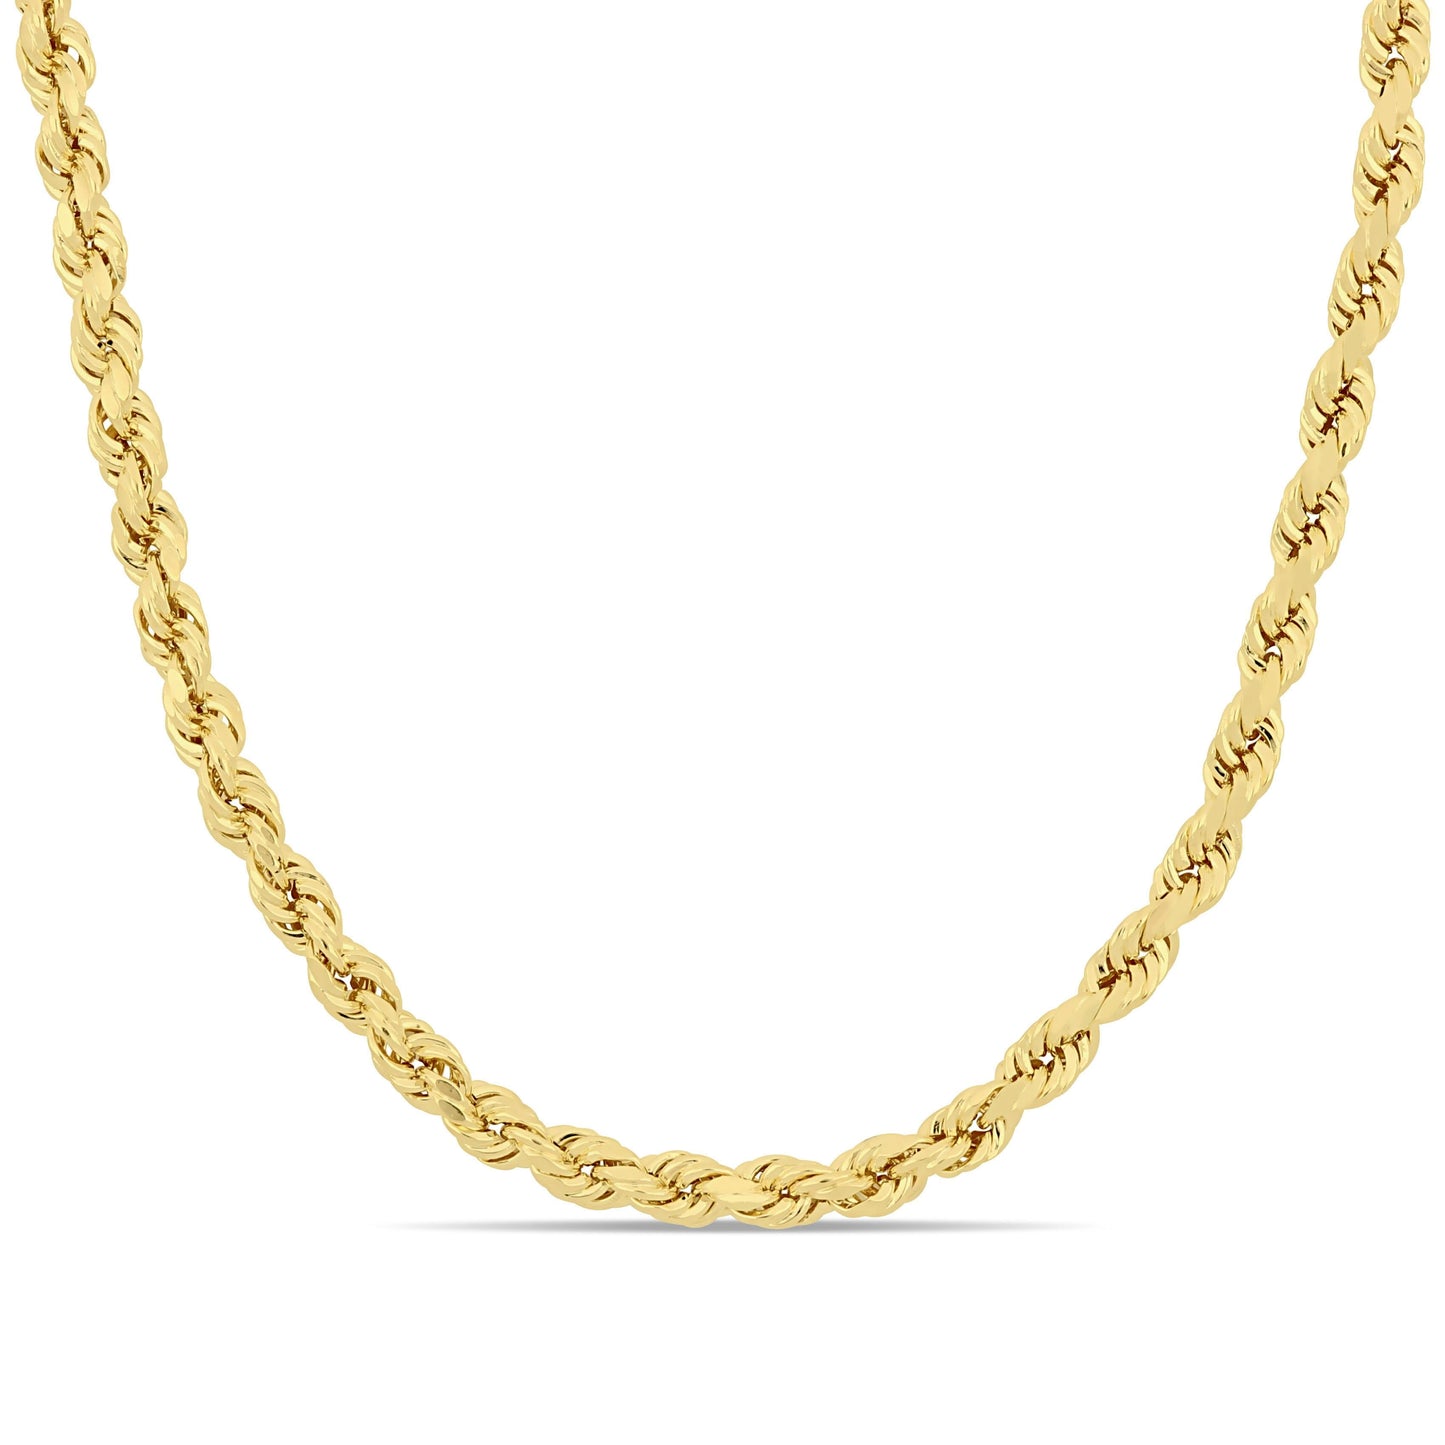 10k Yellow Gold Rope Chain in 4mm